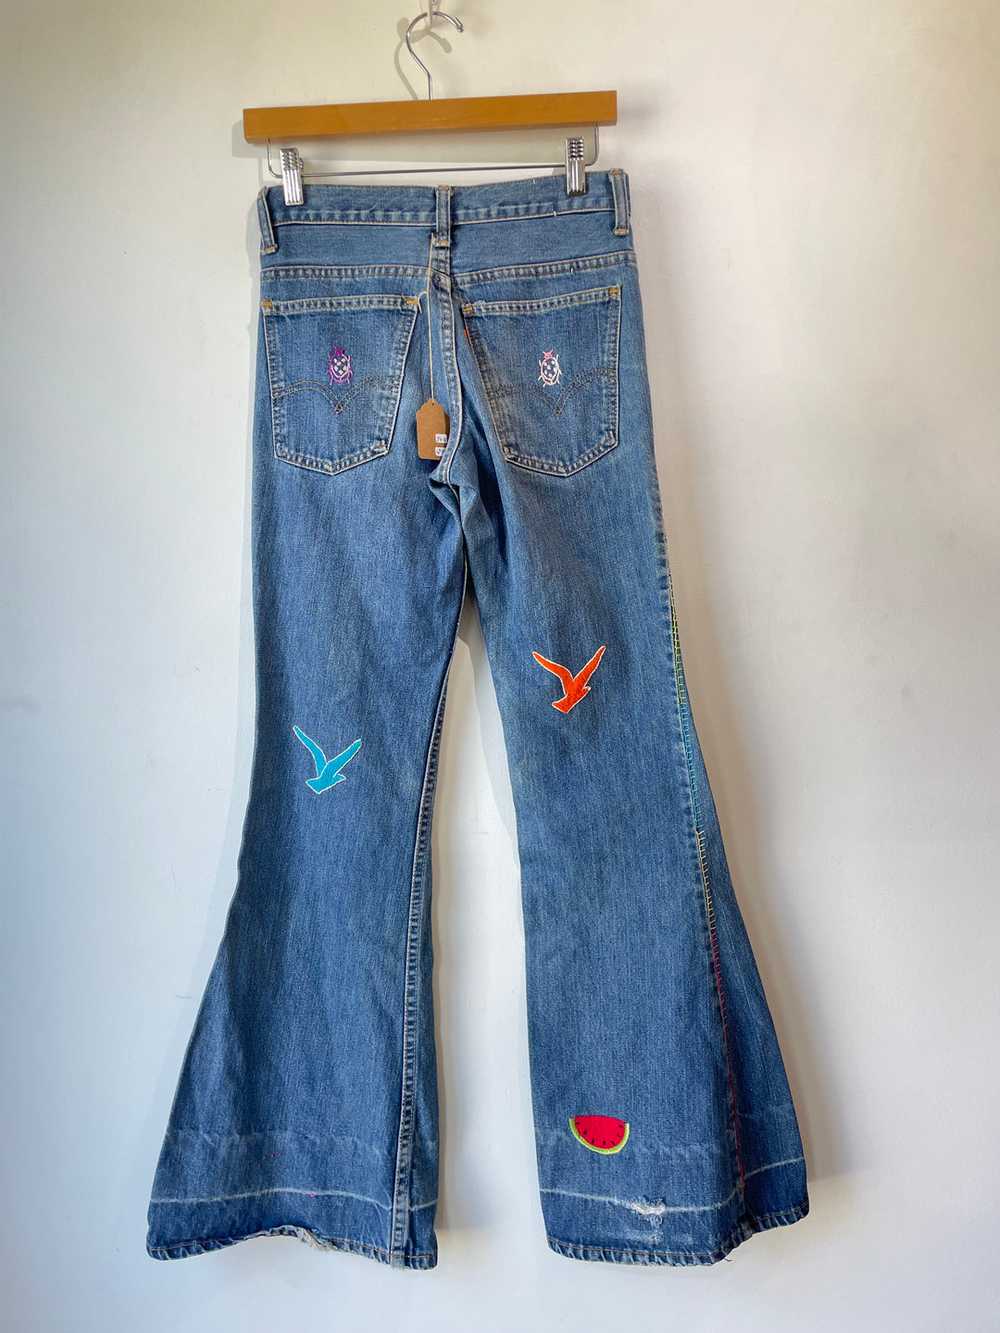 Vintage Levi's High-Waisted Bell Bottoms Jeans - image 2